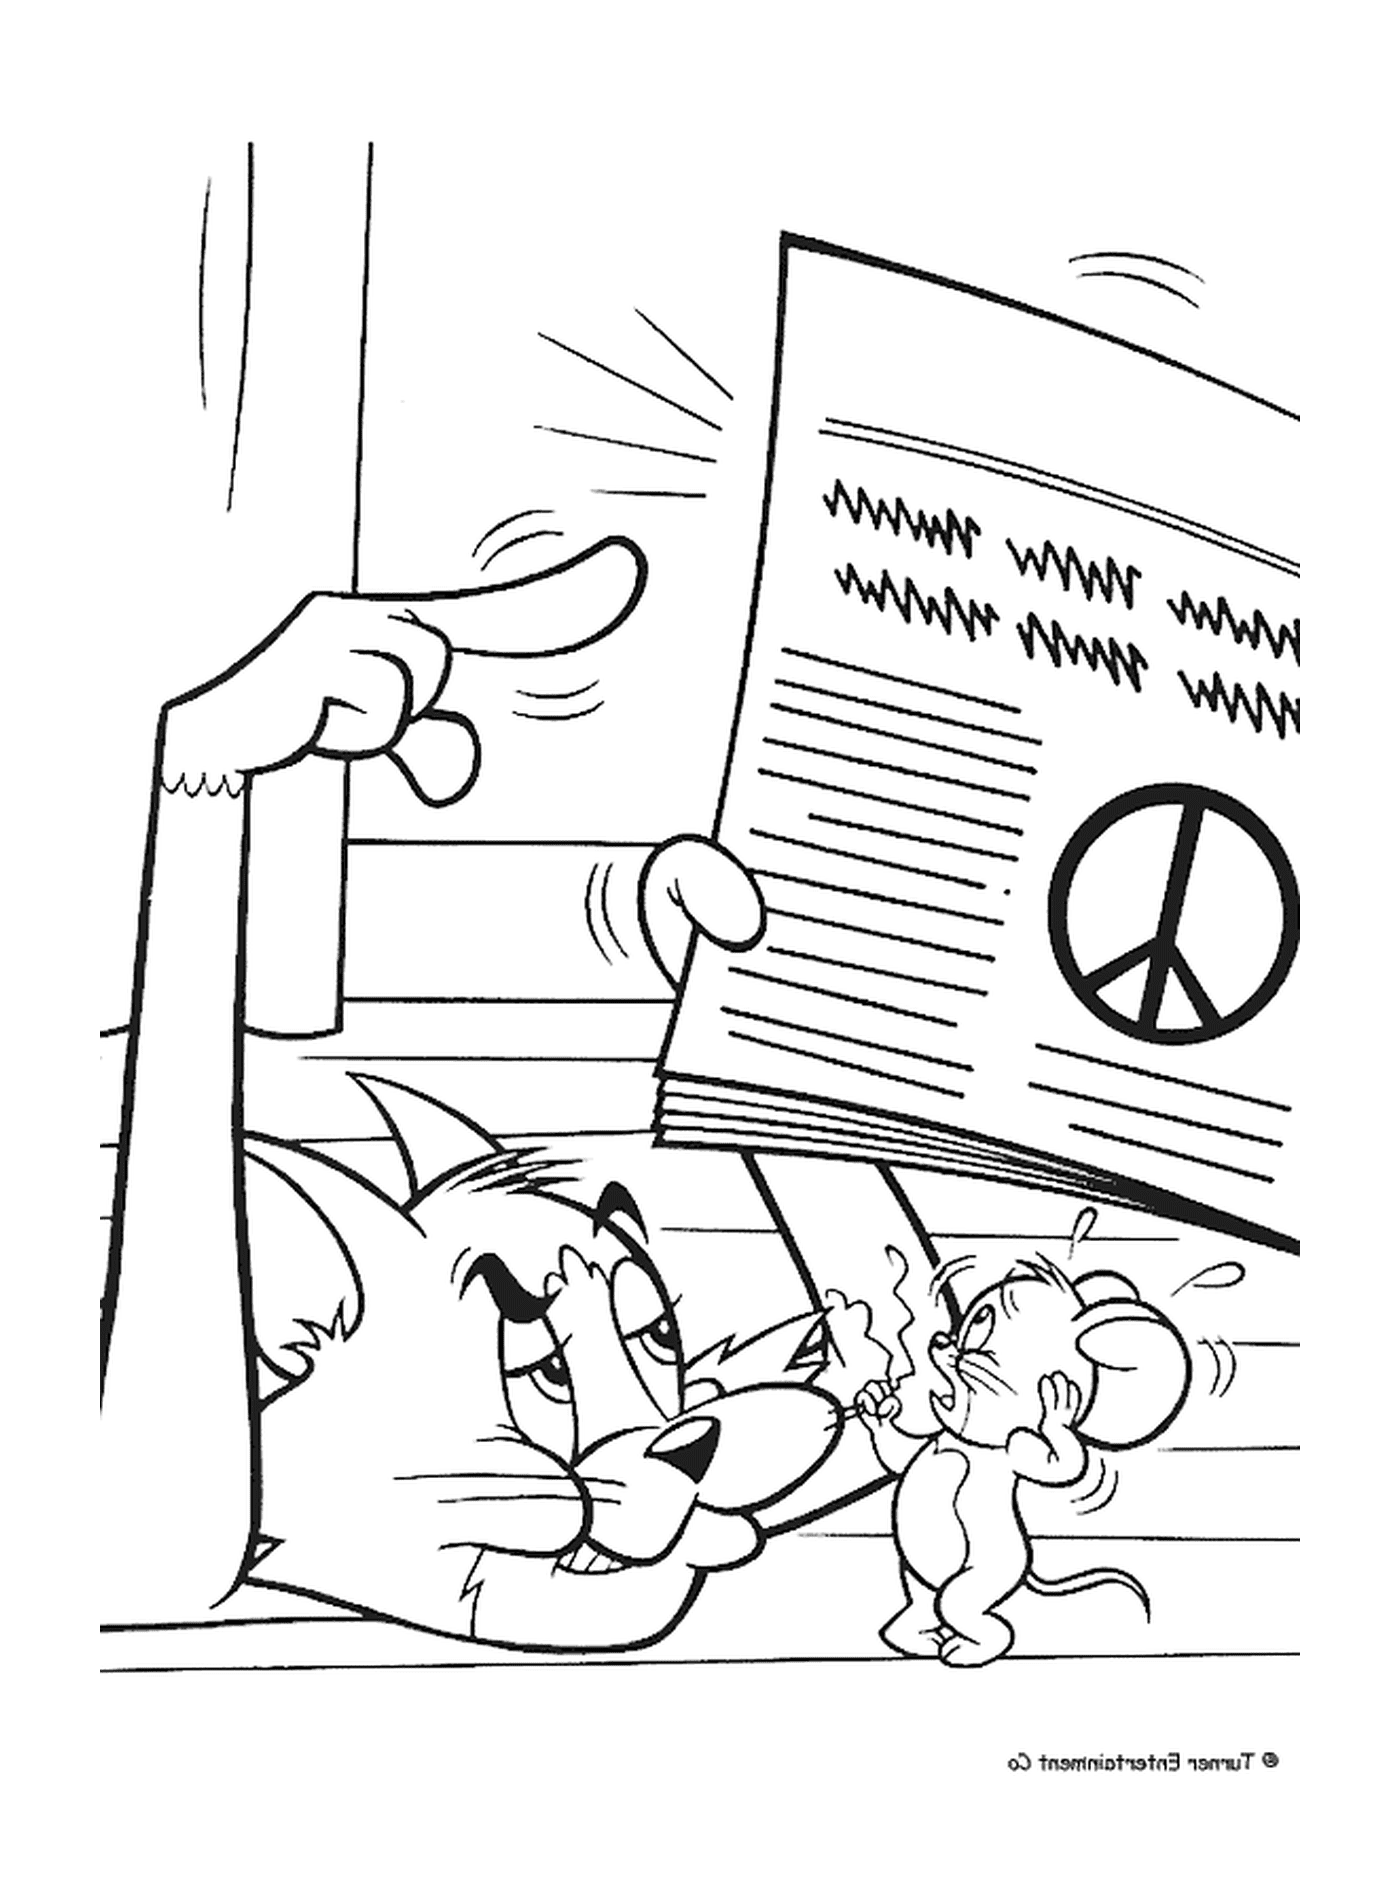  Tom shows Jerry the peace and love logo 